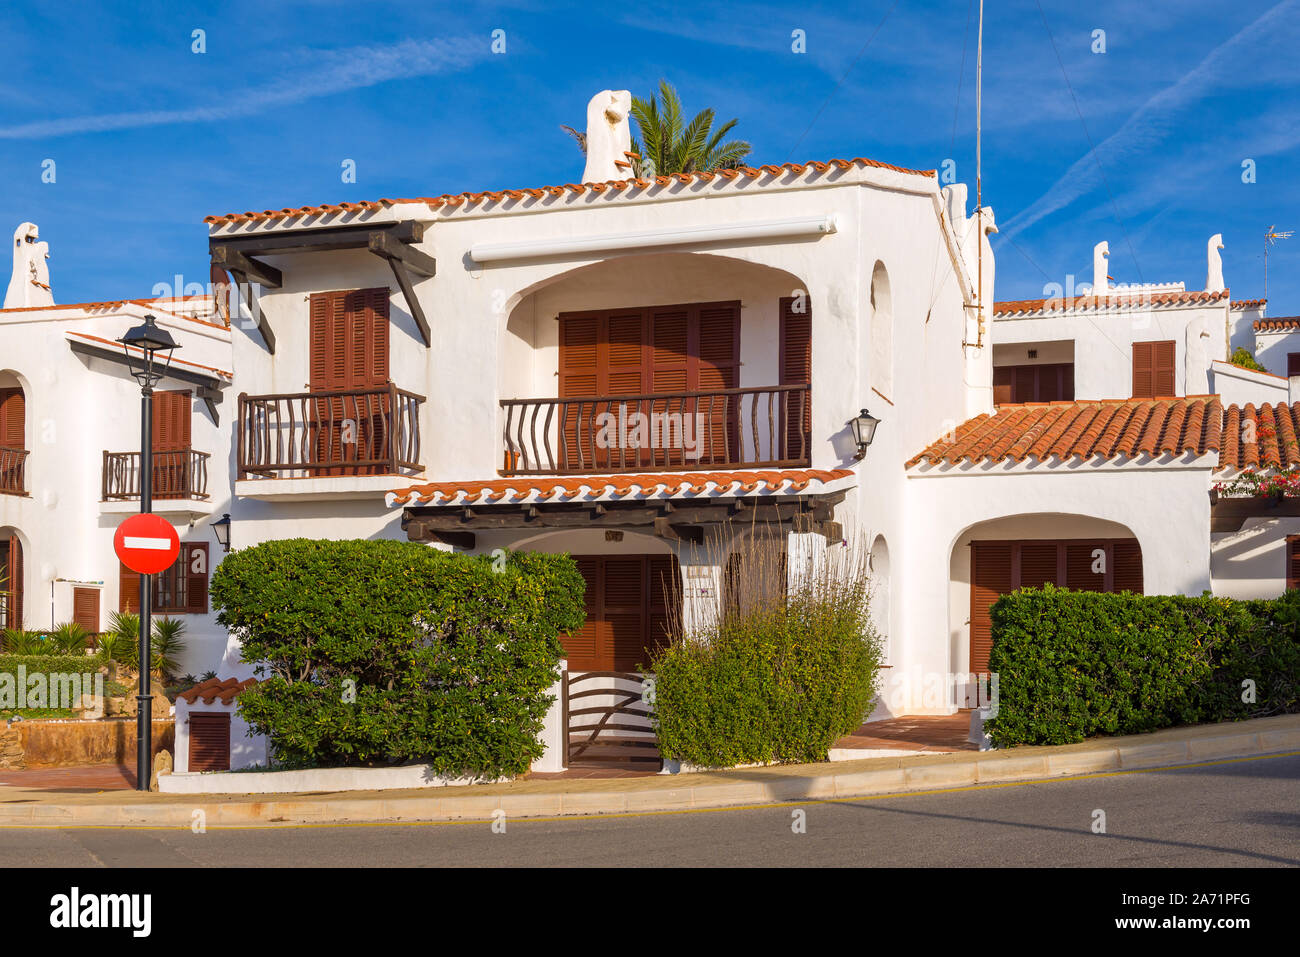 Traditional Spanish architecture with white summer villas on the island of Menorca. Spain Stock Photo